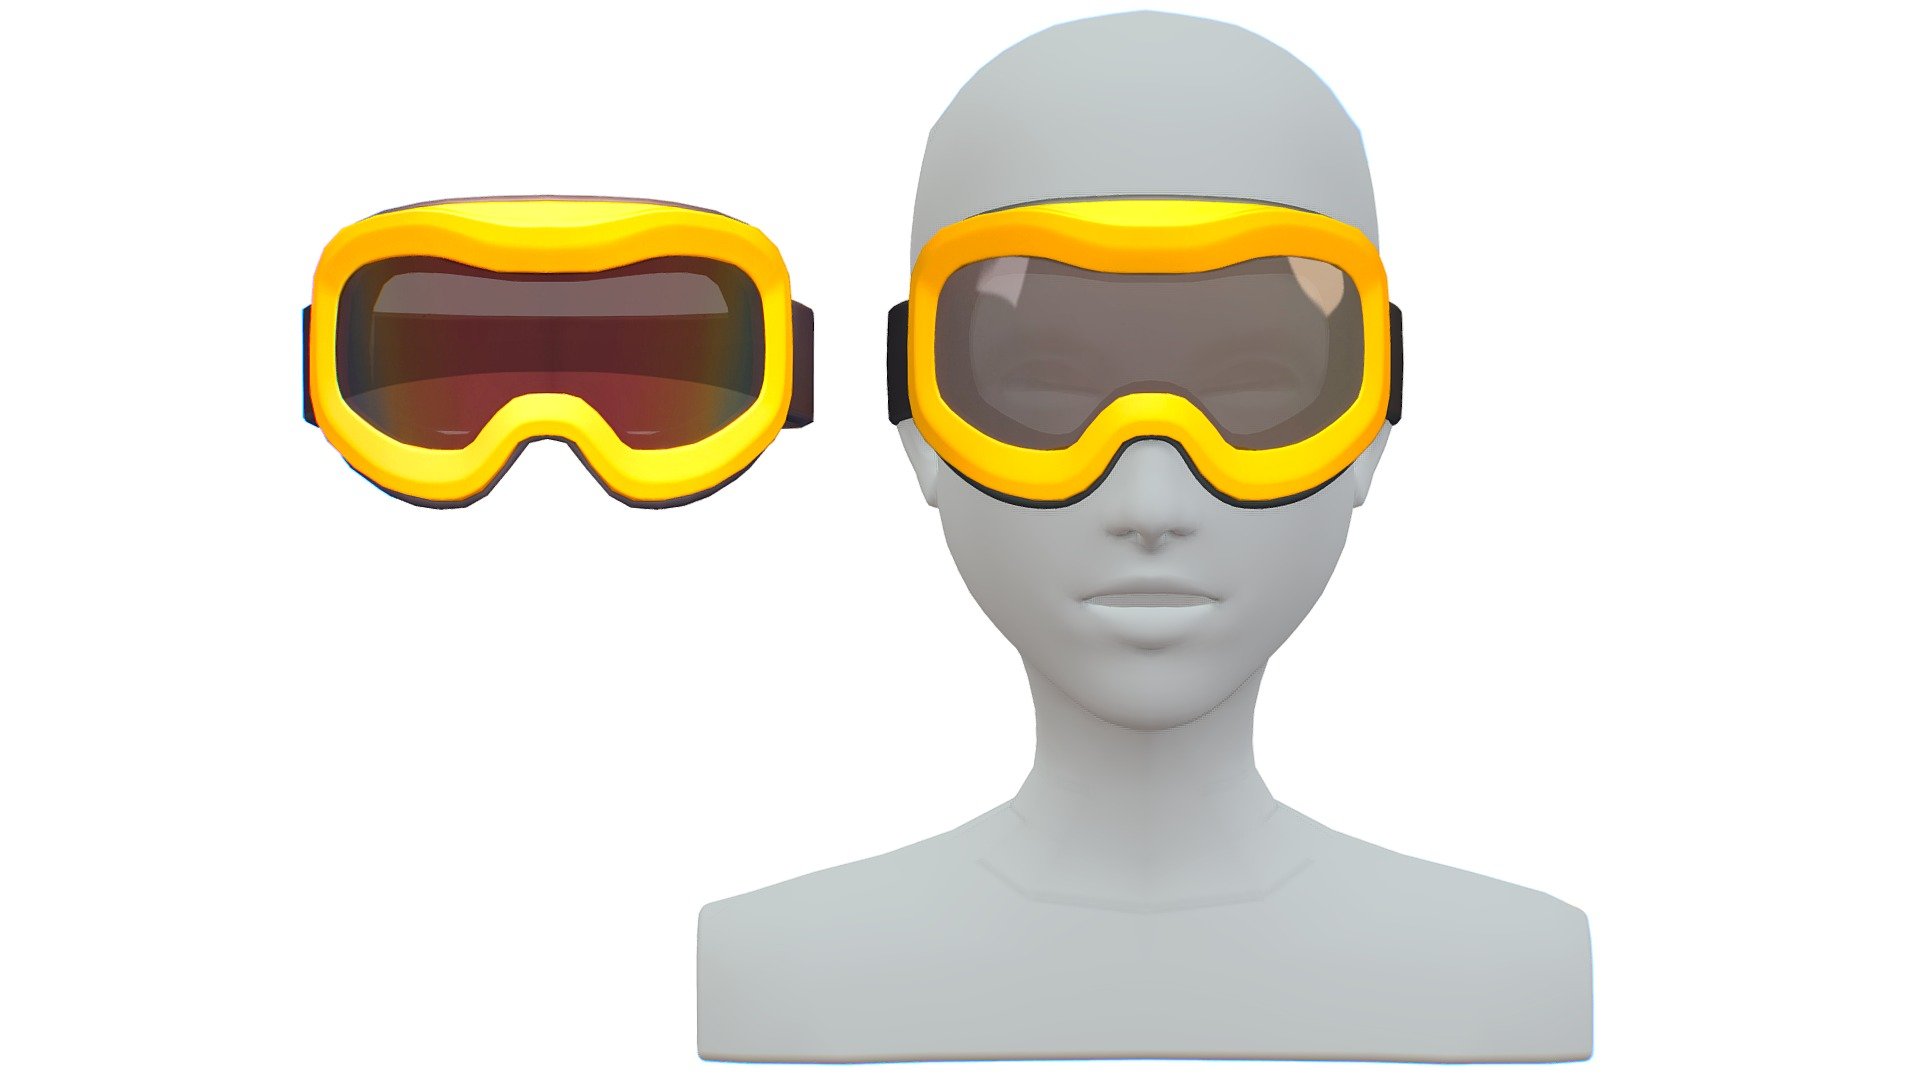 Cartoon High Poly Subdivision Ski Goggles

No HDRI map, No Light, No material settings - only Diffuse/Color Map Texture (1024x1024)

More information about the 3D model: please use the Sketchfab Model Inspector - Key (i) - Cartoon High Poly Subdivision Ski Goggles - Buy Royalty Free 3D model by Oleg Shuldiakov (@olegshuldiakov) 3d model